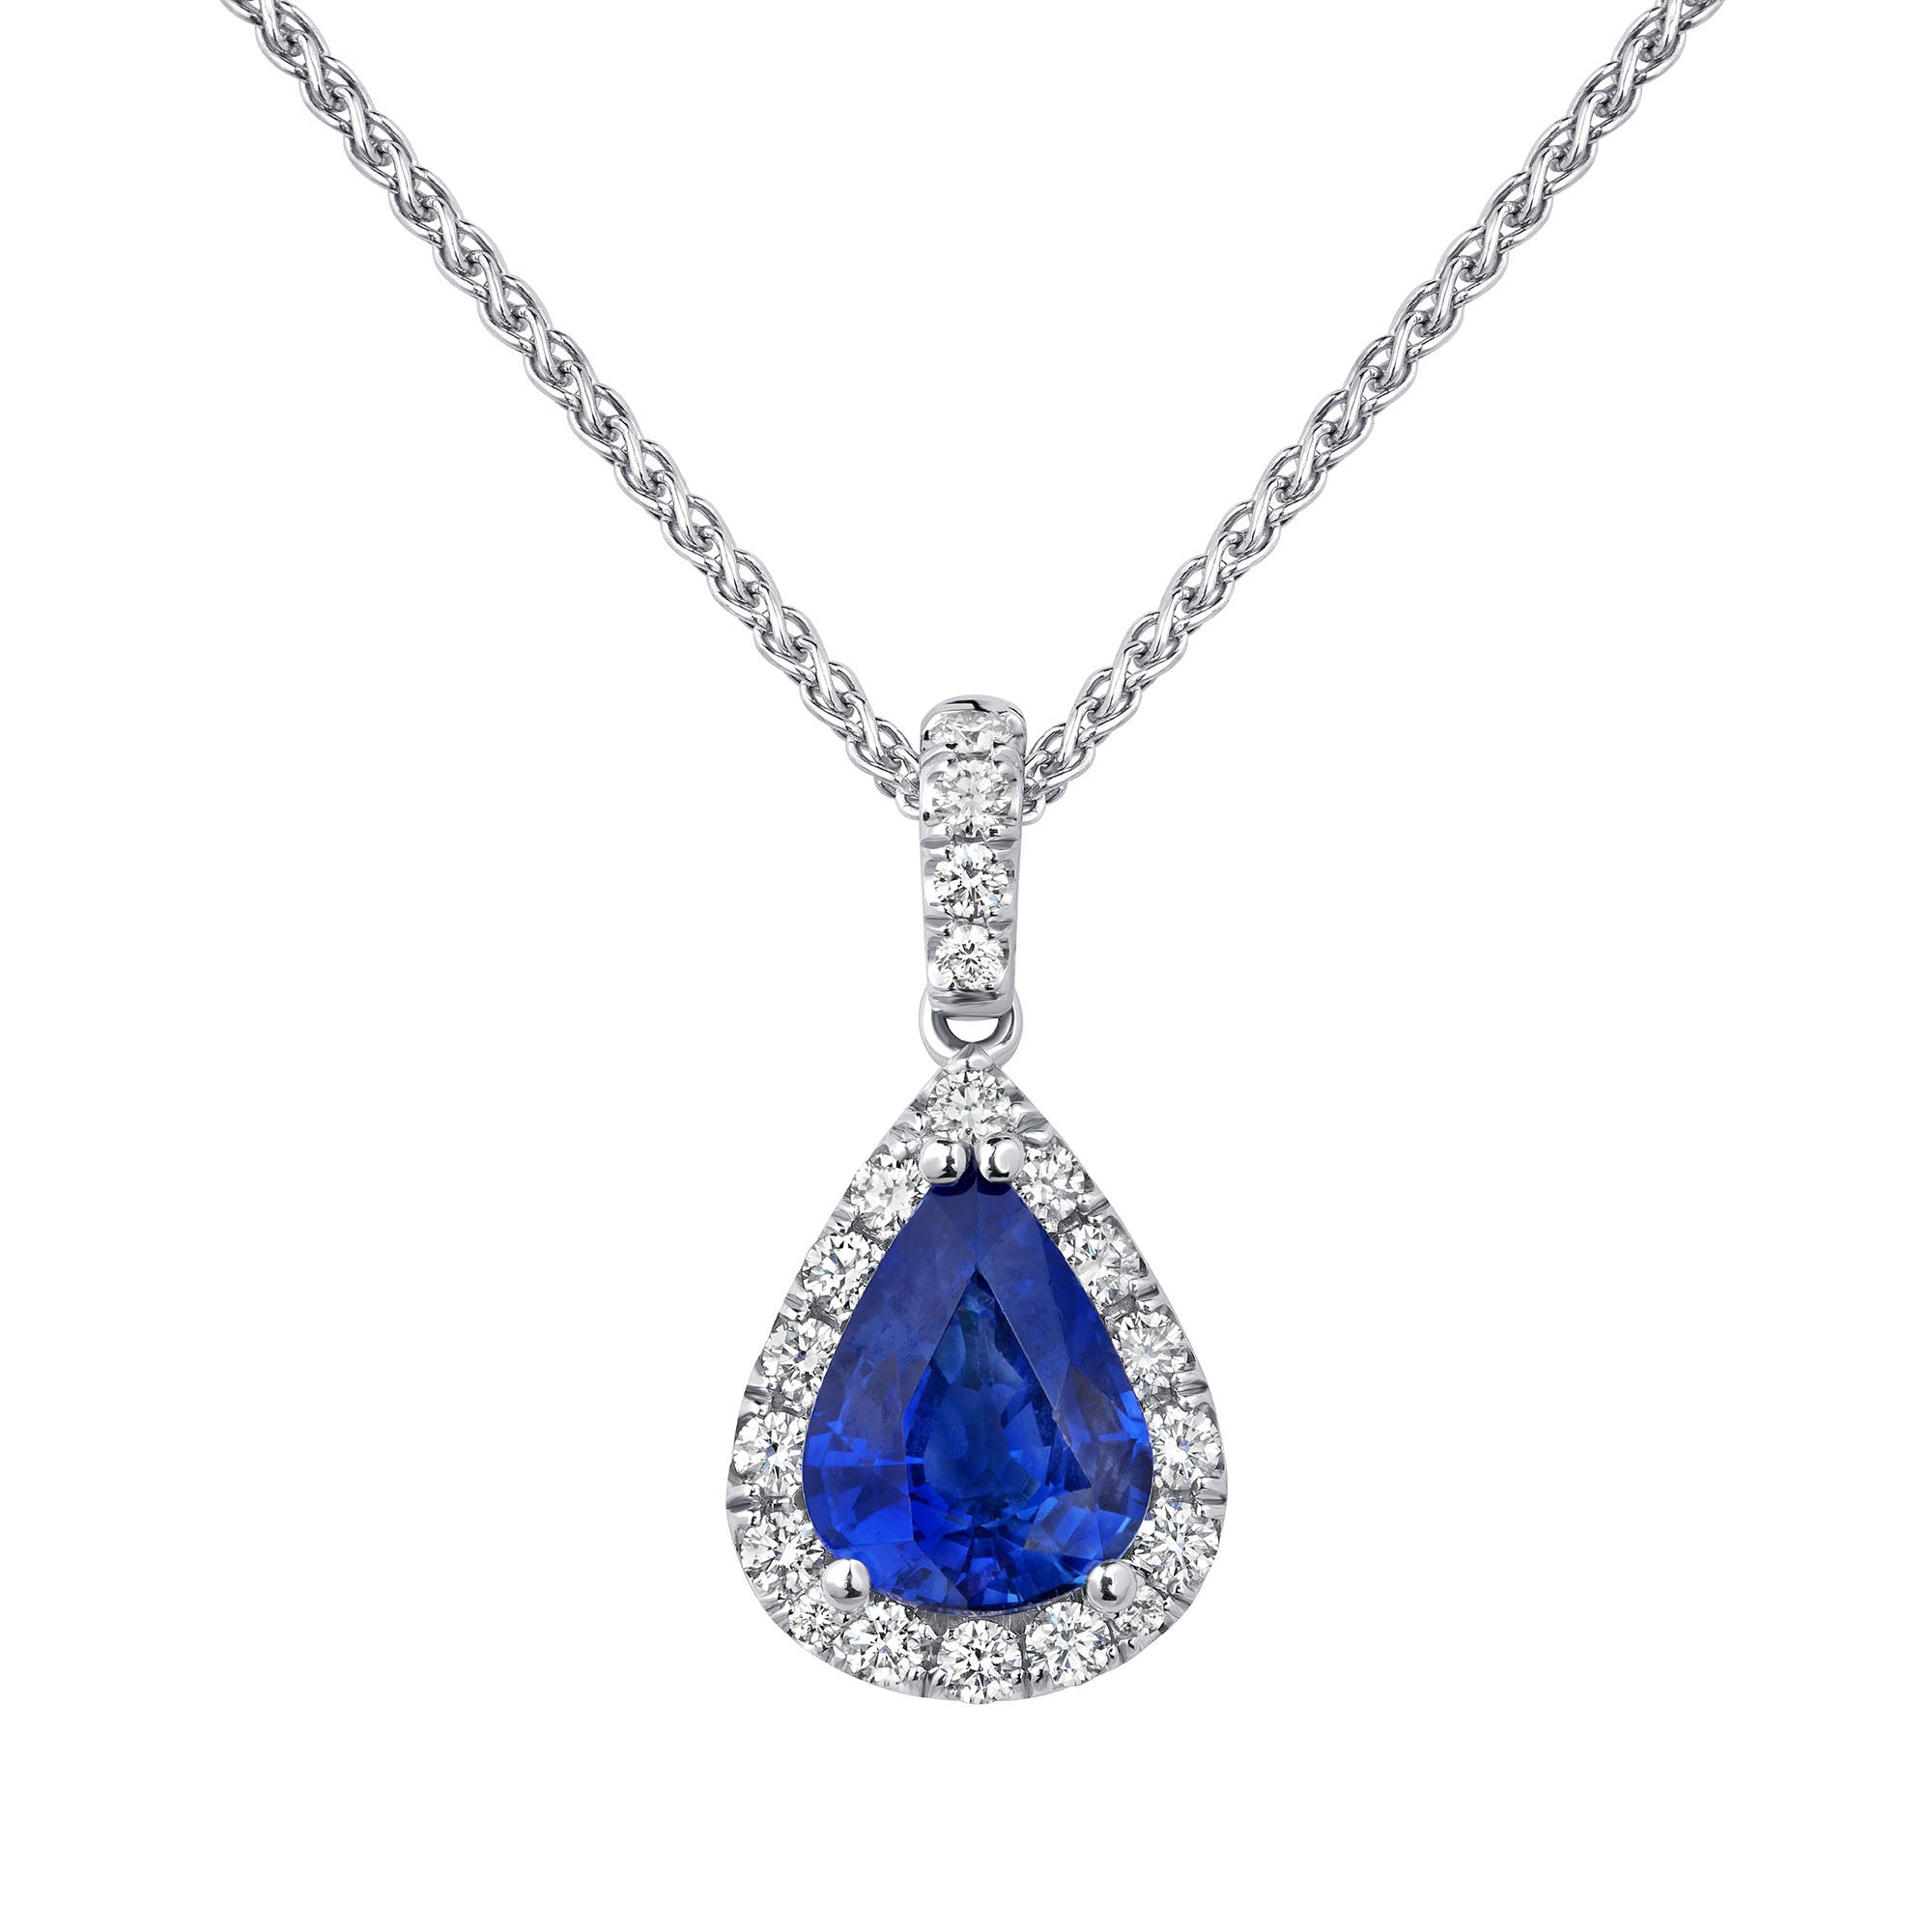 Pear Cut Sapphire Teardrop Pendant Necklace with Diamond Halo in White Gold